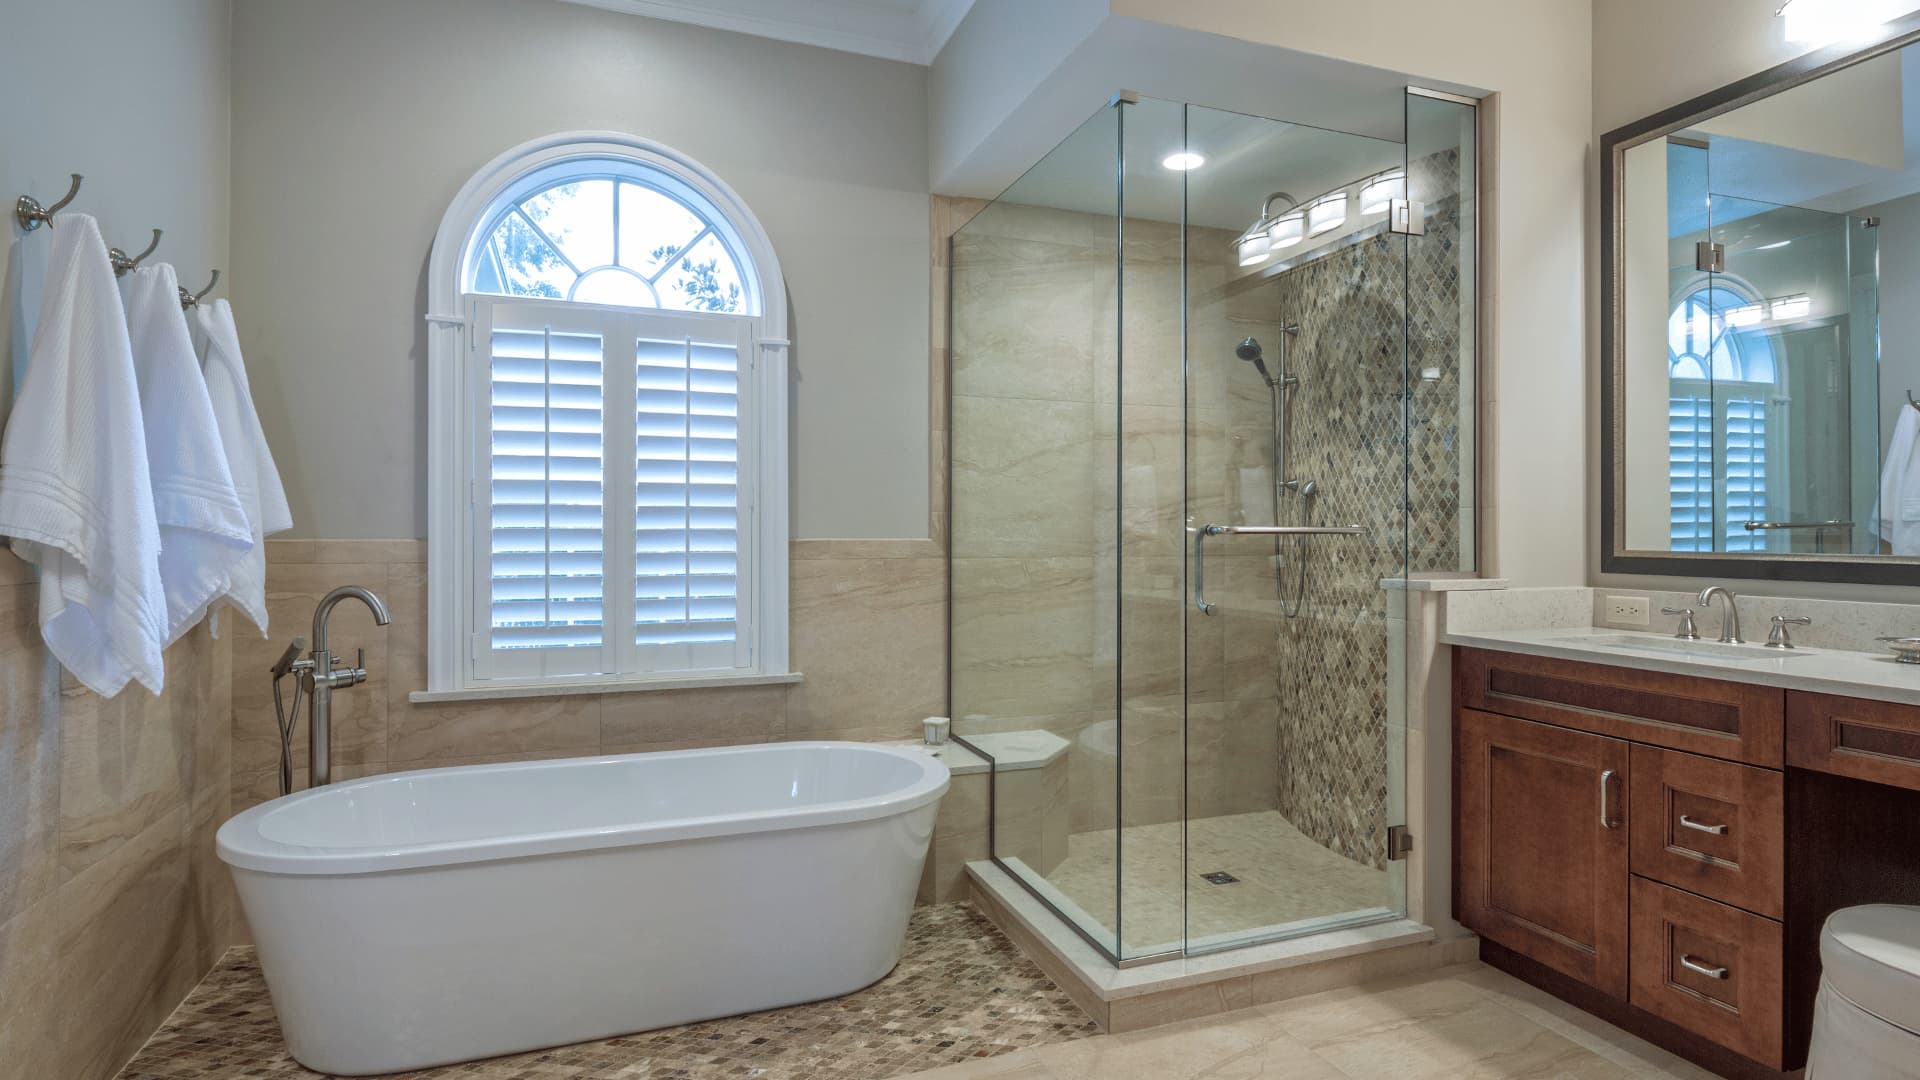 bathroom remodel features a sleek white bathtub alongside a stylish glass shower, creating a clean and contemporary look